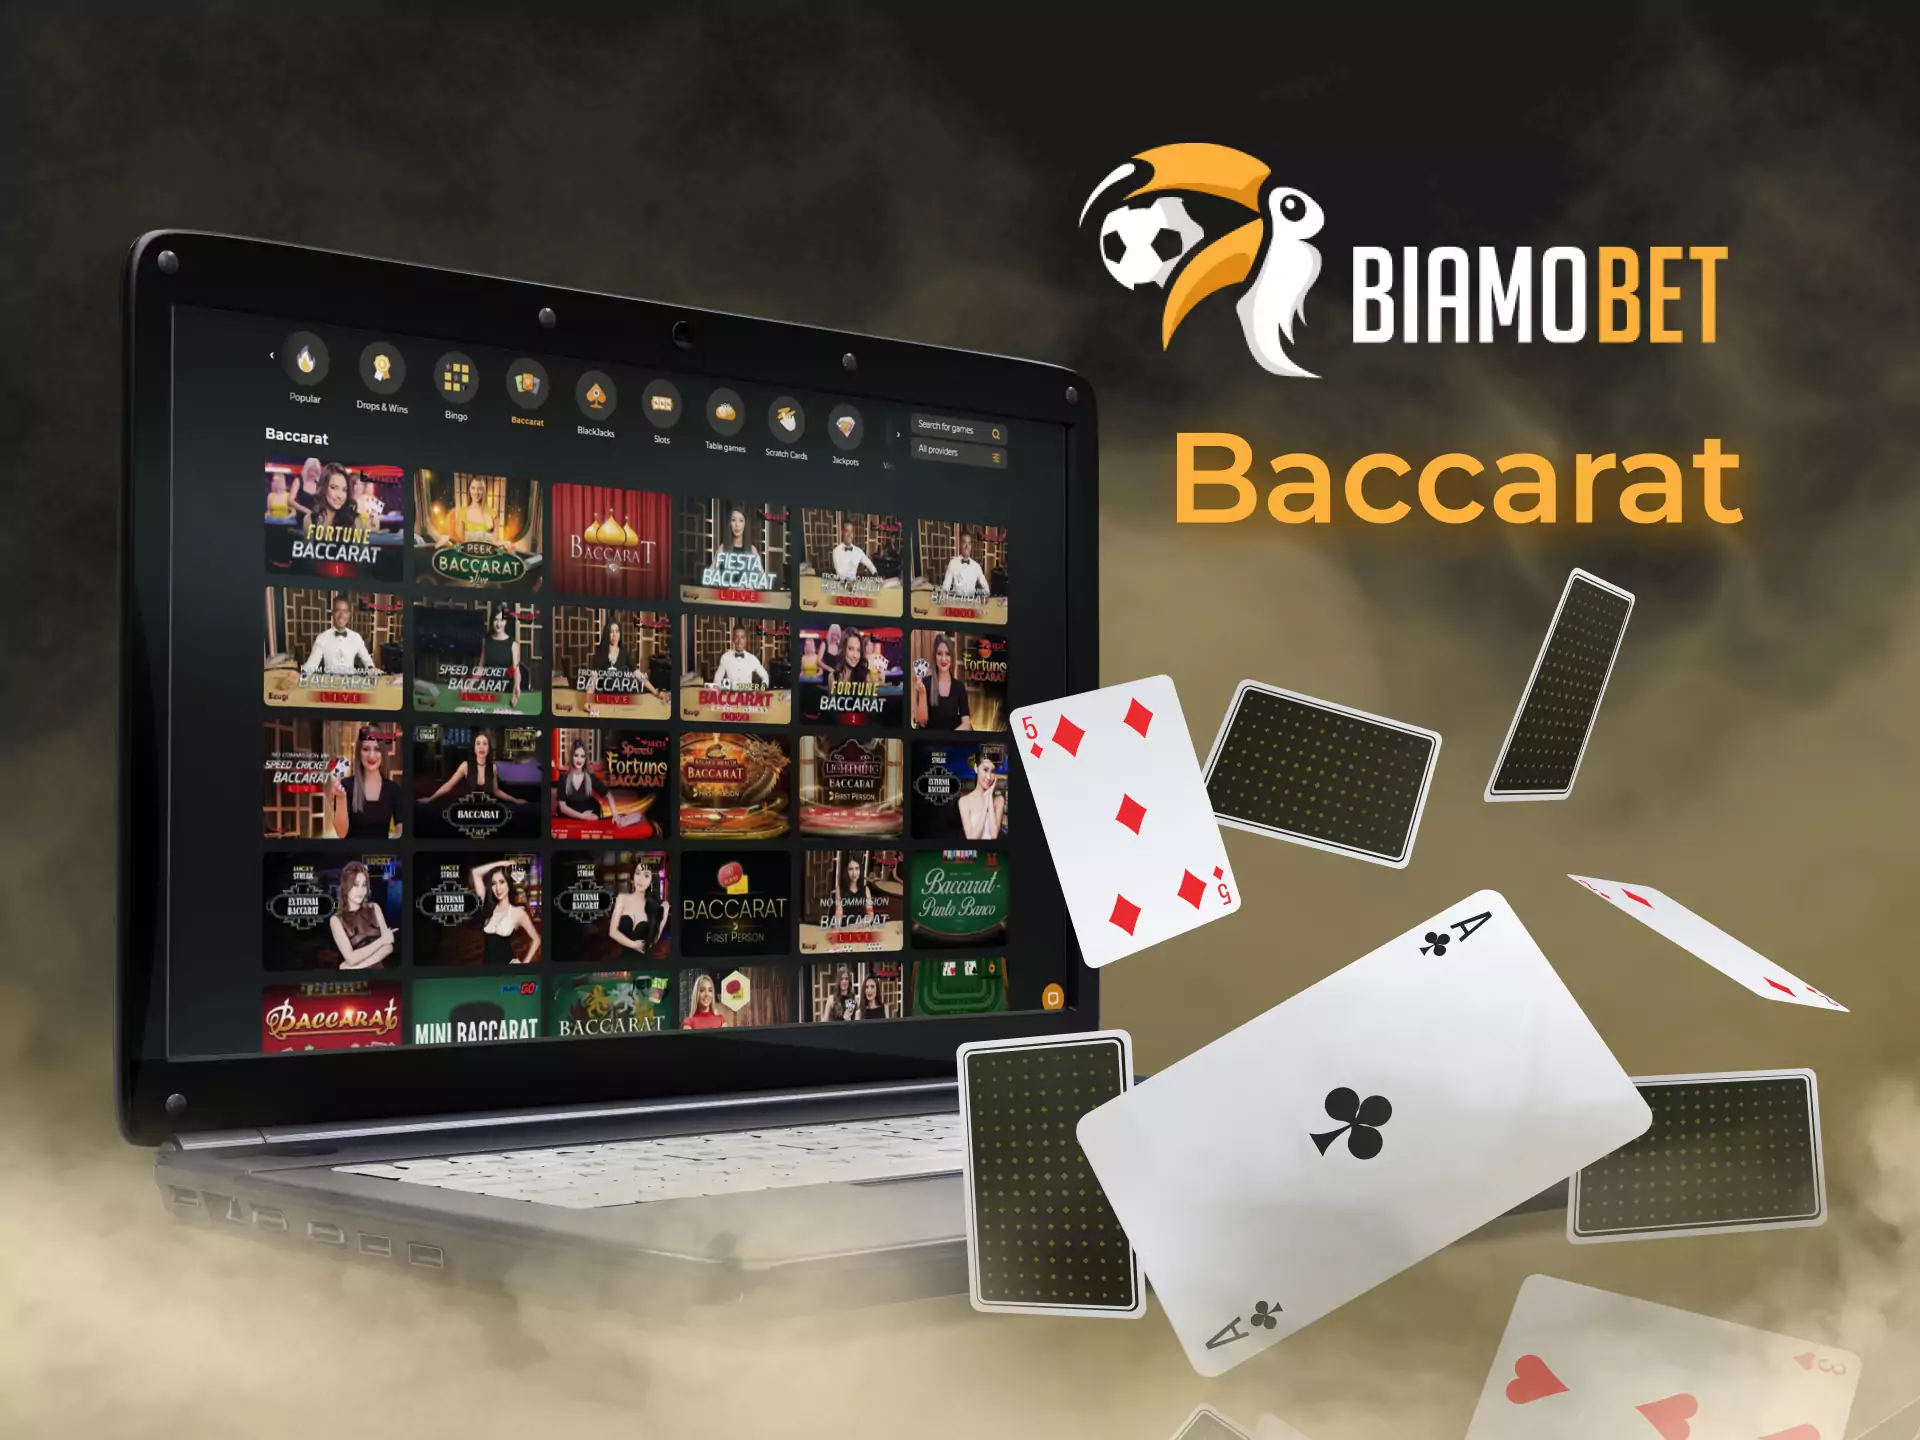 You can play the game of baccarat in the Biamobet Casino.